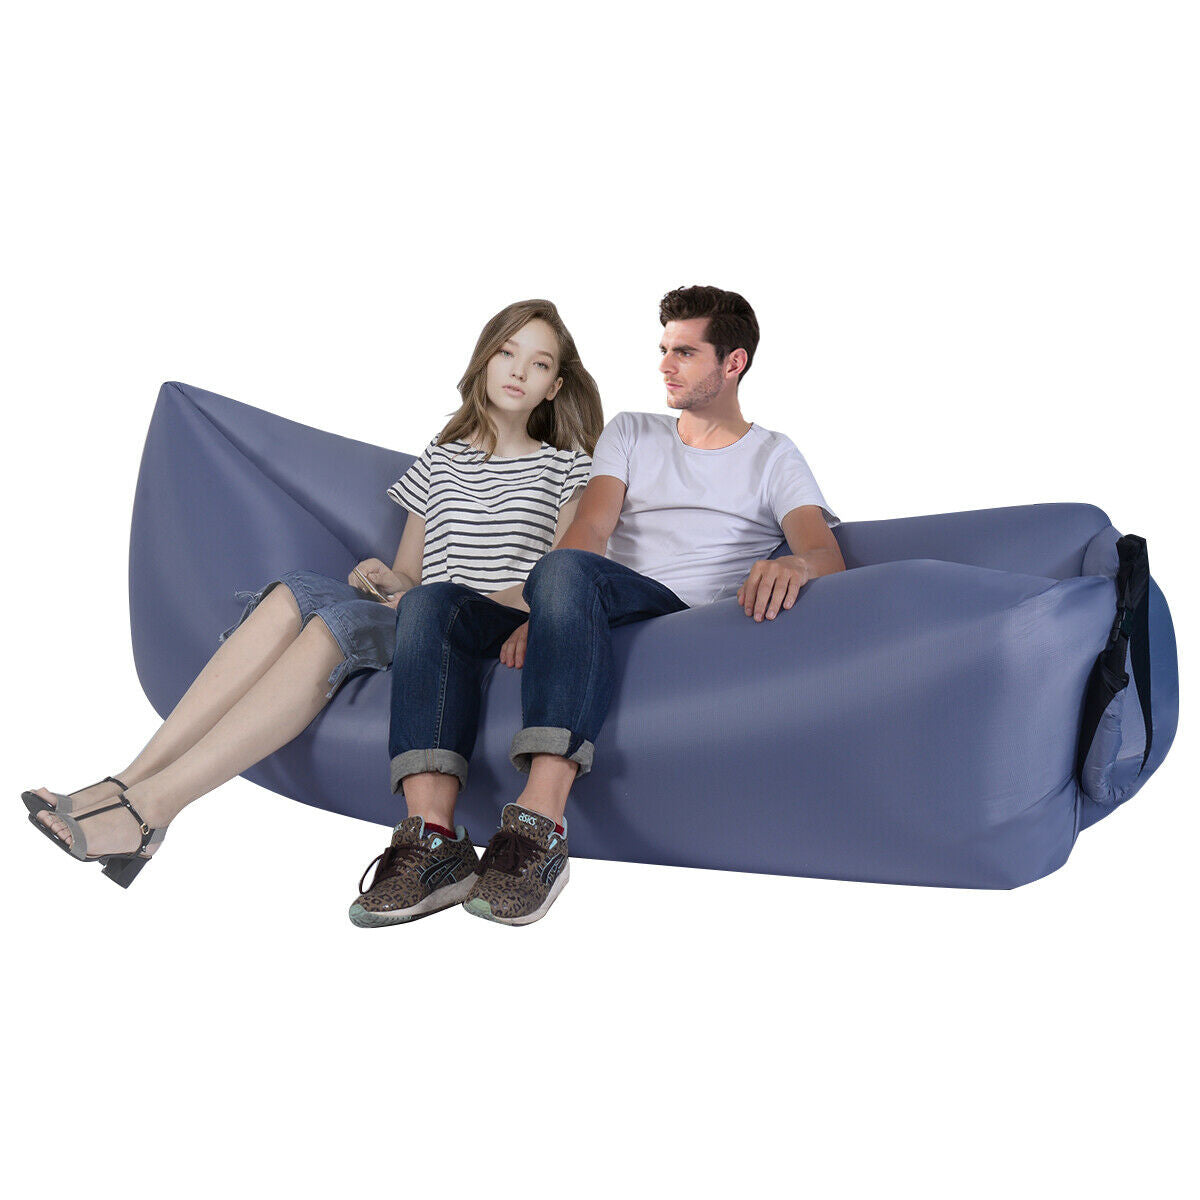 LazyX Ultralight Inflatable Bed Portable Lounger Lightweight Outdoor Camping